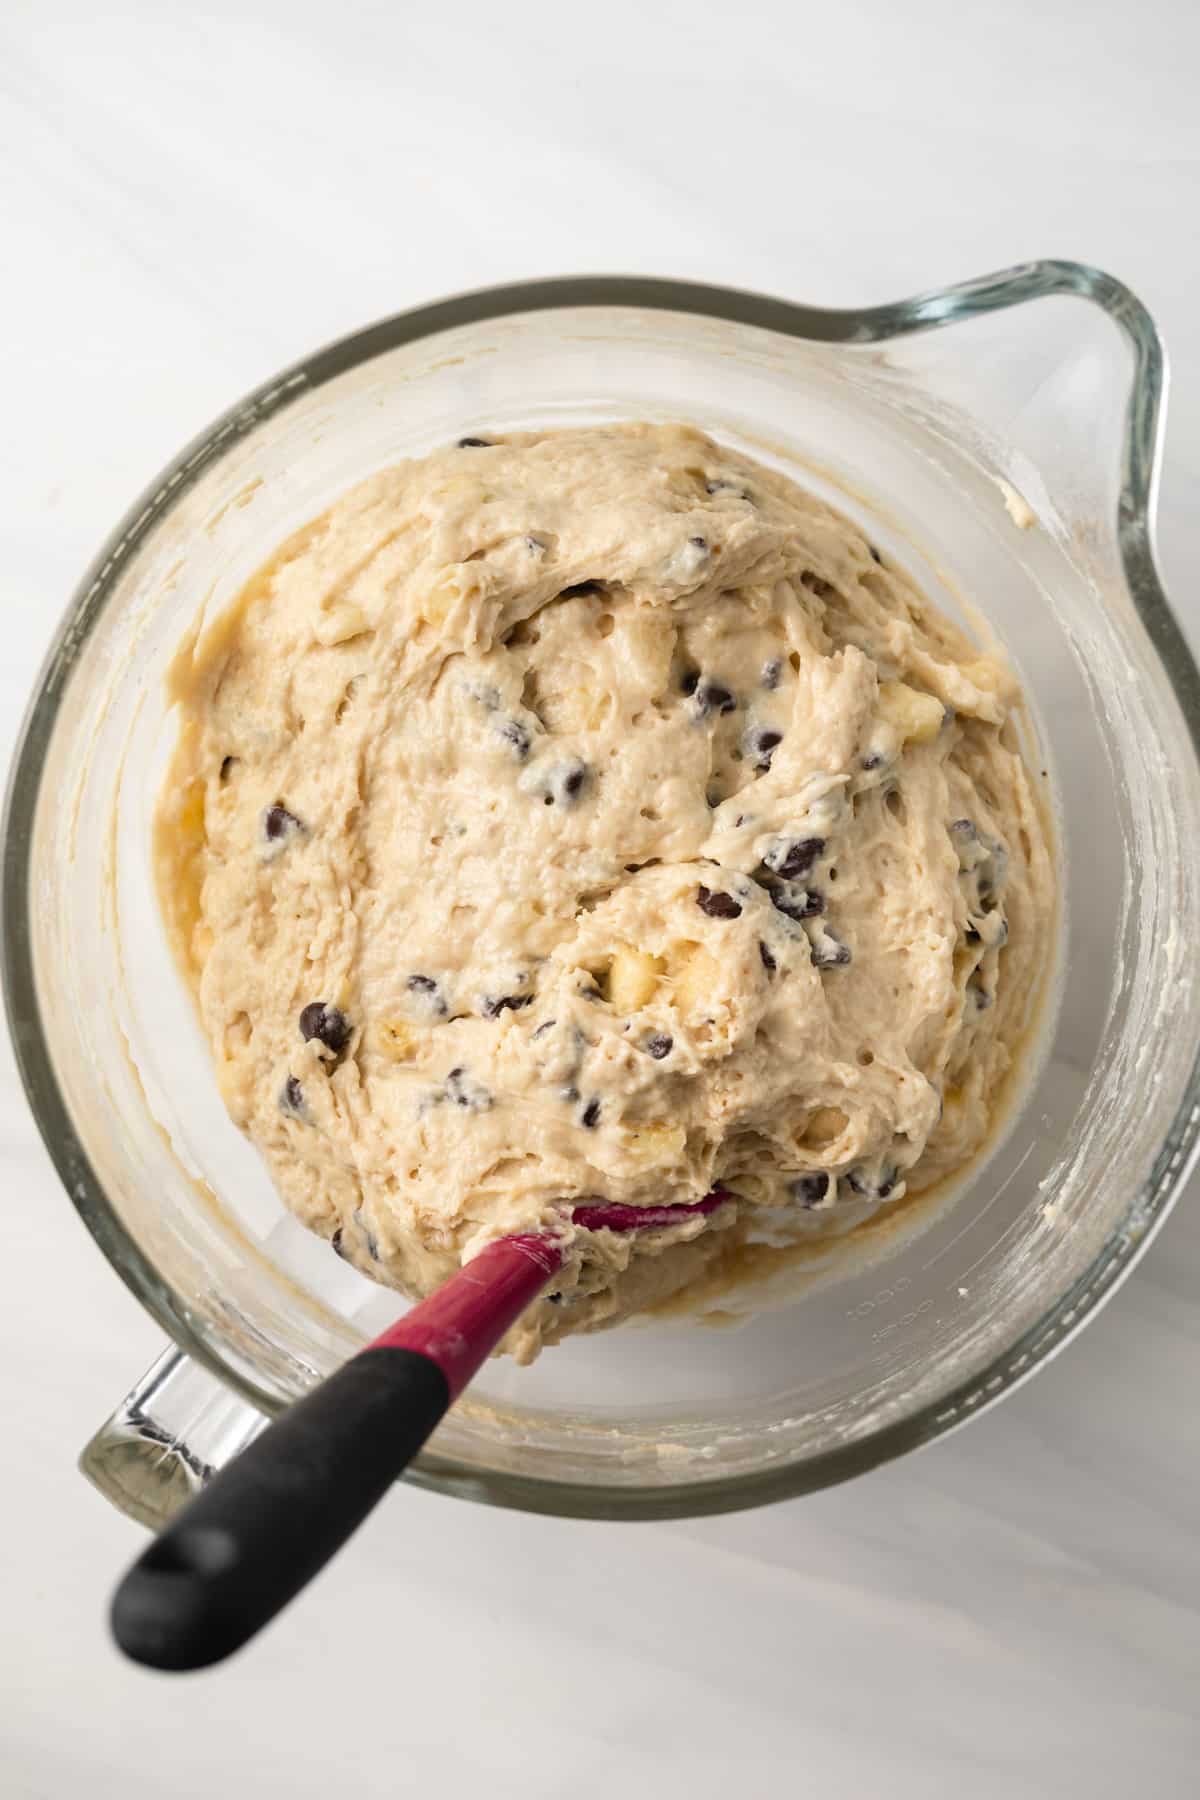 Banana chocolate chip muffin batter in glass mixing bowl.